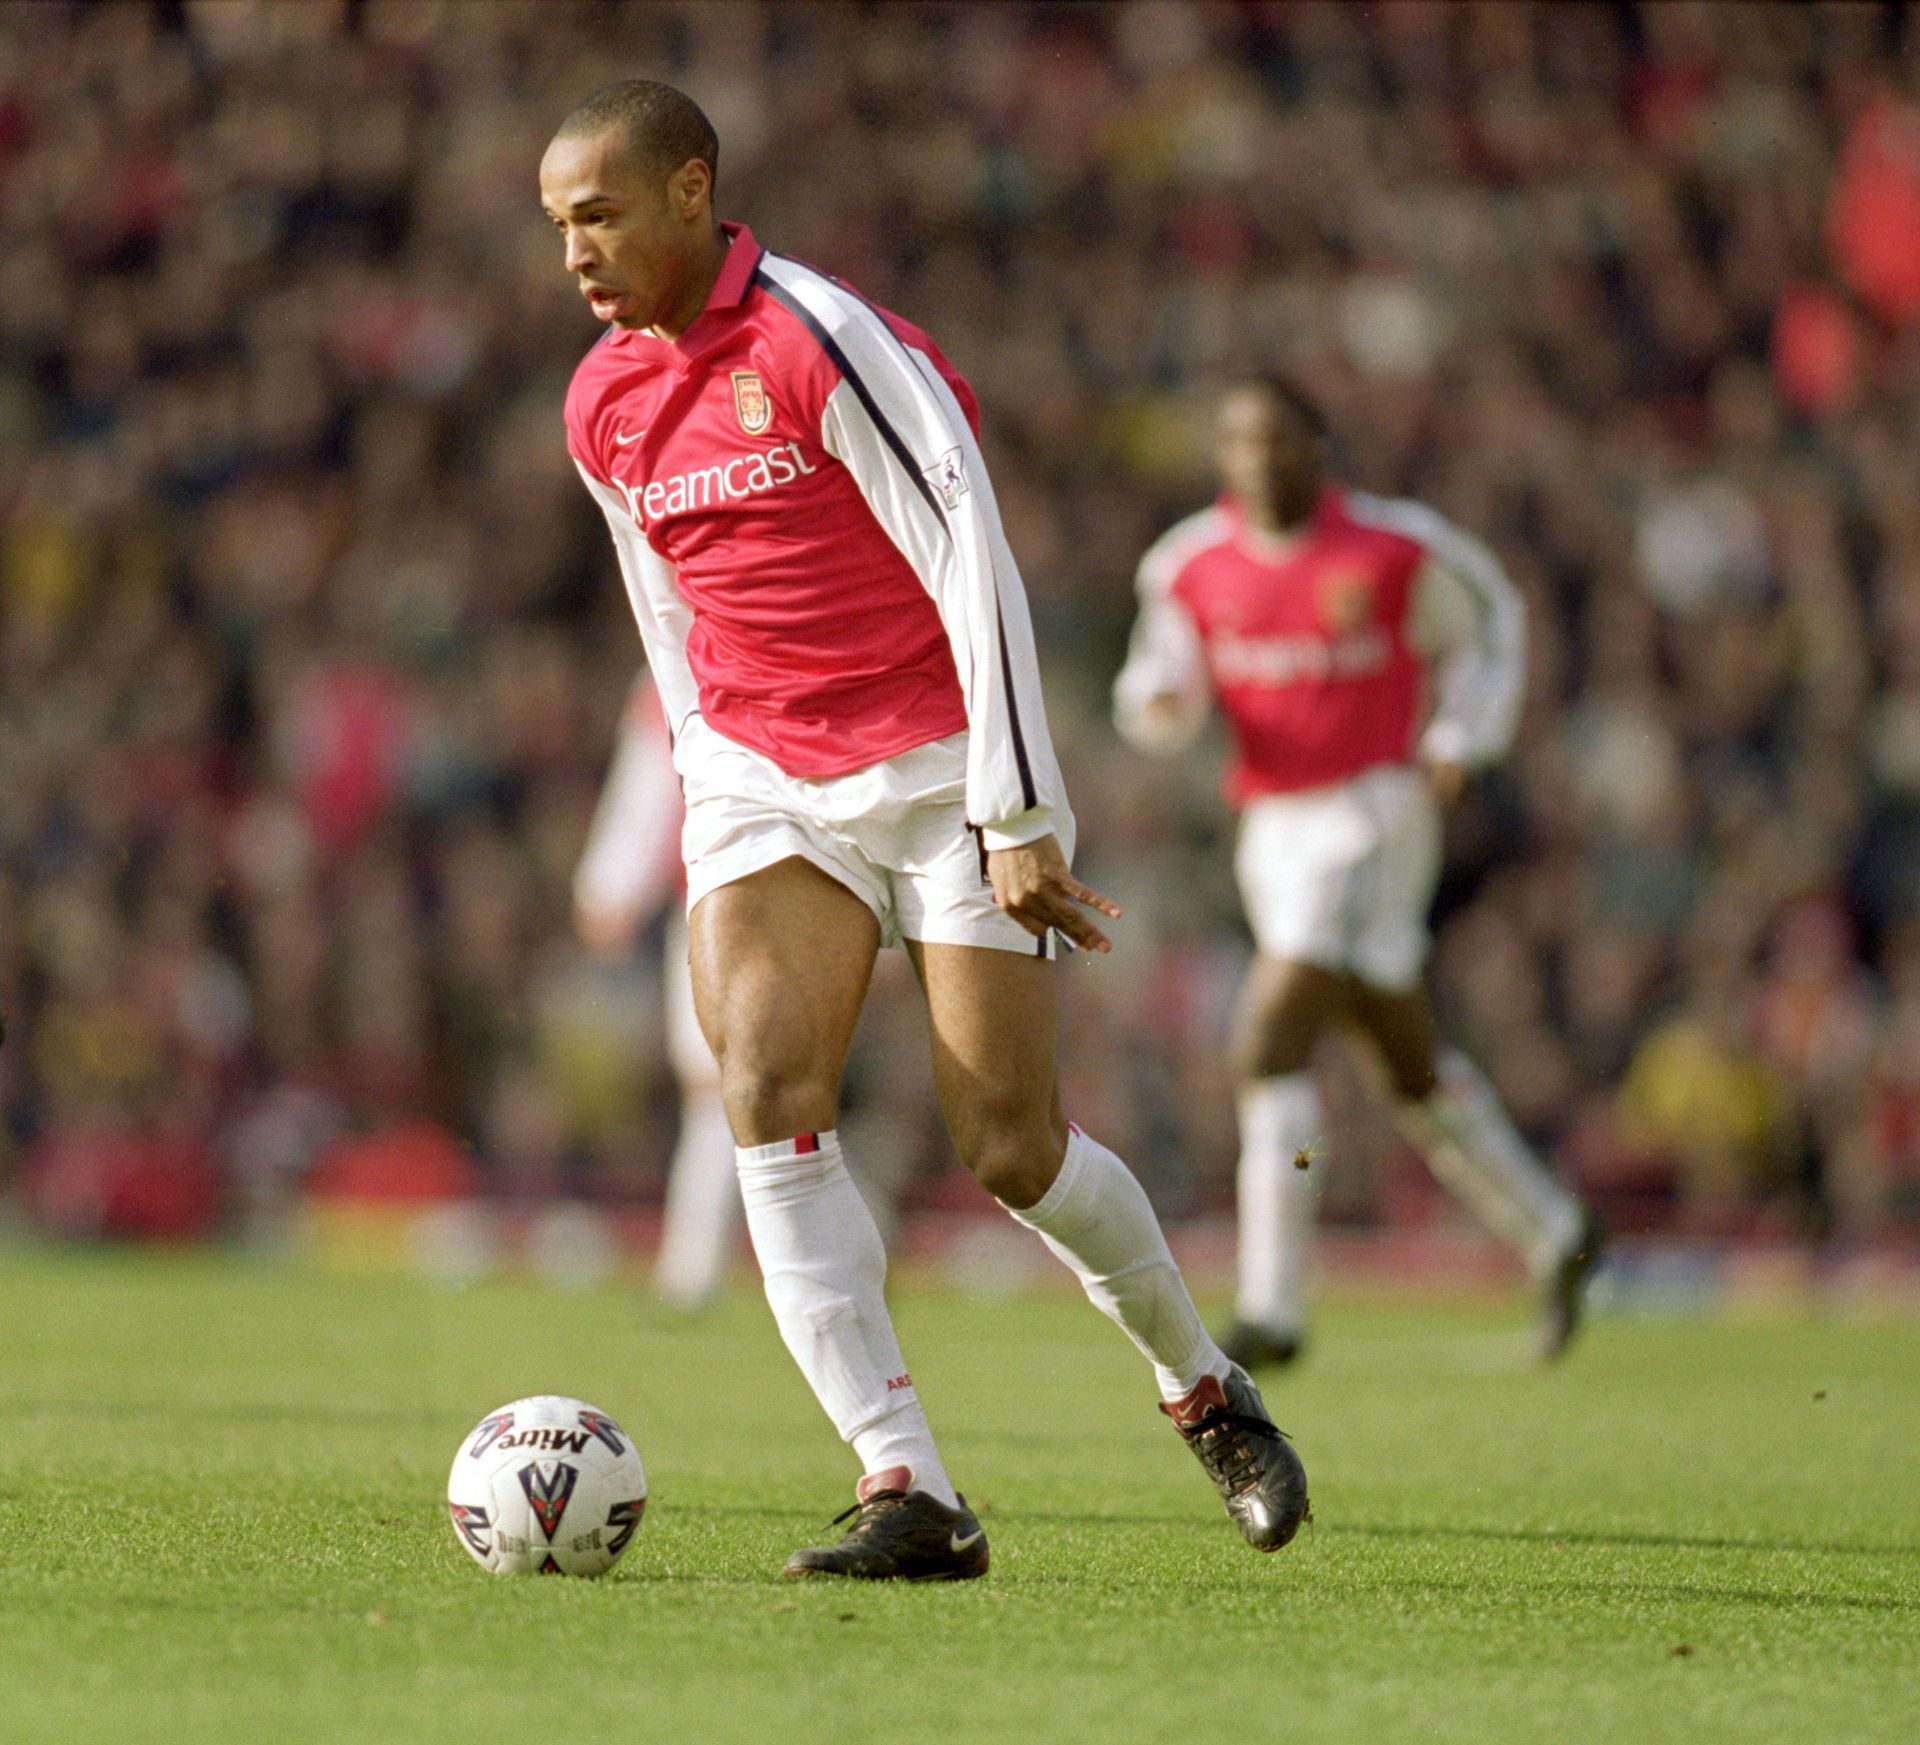 Thierry Henry is one of the most prolific foreign scorers in Premier League history.